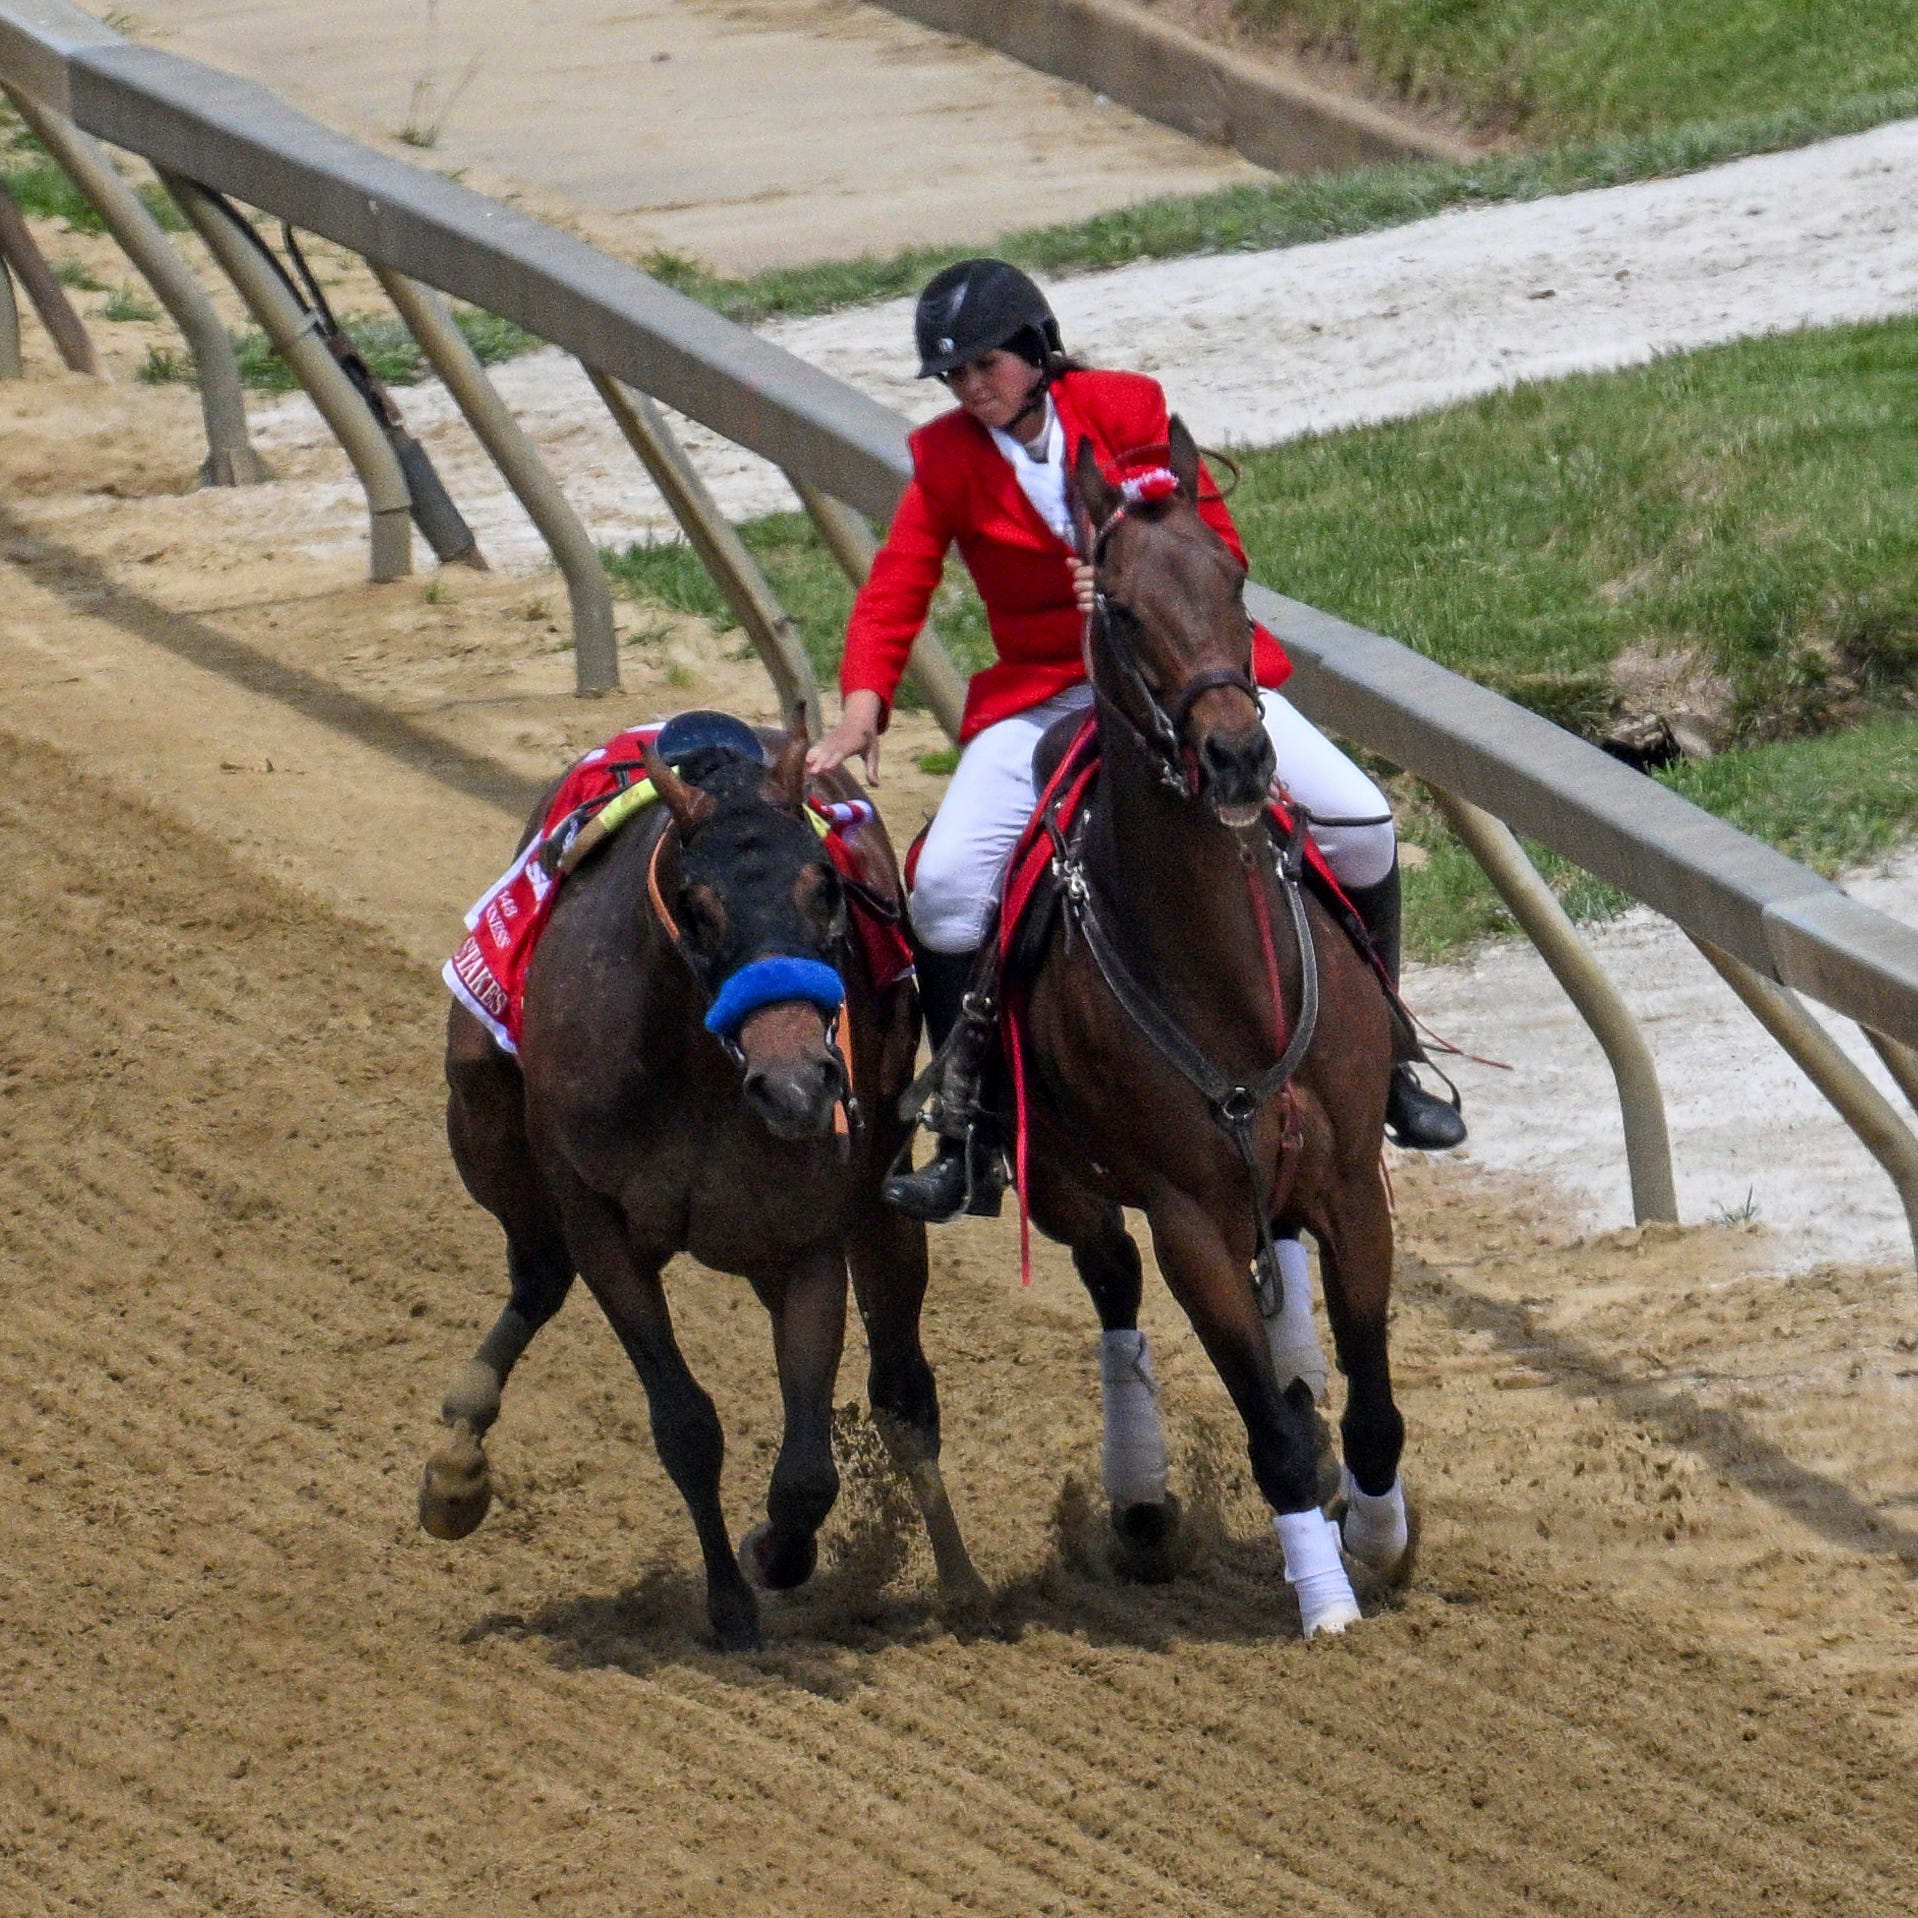 An outrider intercepts Havnameltdown after the horse lost it's rider and suffered a catastrophic leg injury during the sixth race prior to the 148th running of the Preakness Stakes horse race at Pimlico Race Course, Saturday, May 20, 2023, in Baltimore. The Bob Baffert trained horse was euthanized on the race track. (Jerry Jackson/The Baltimore Sun via AP) ORG XMIT: MDBAE201